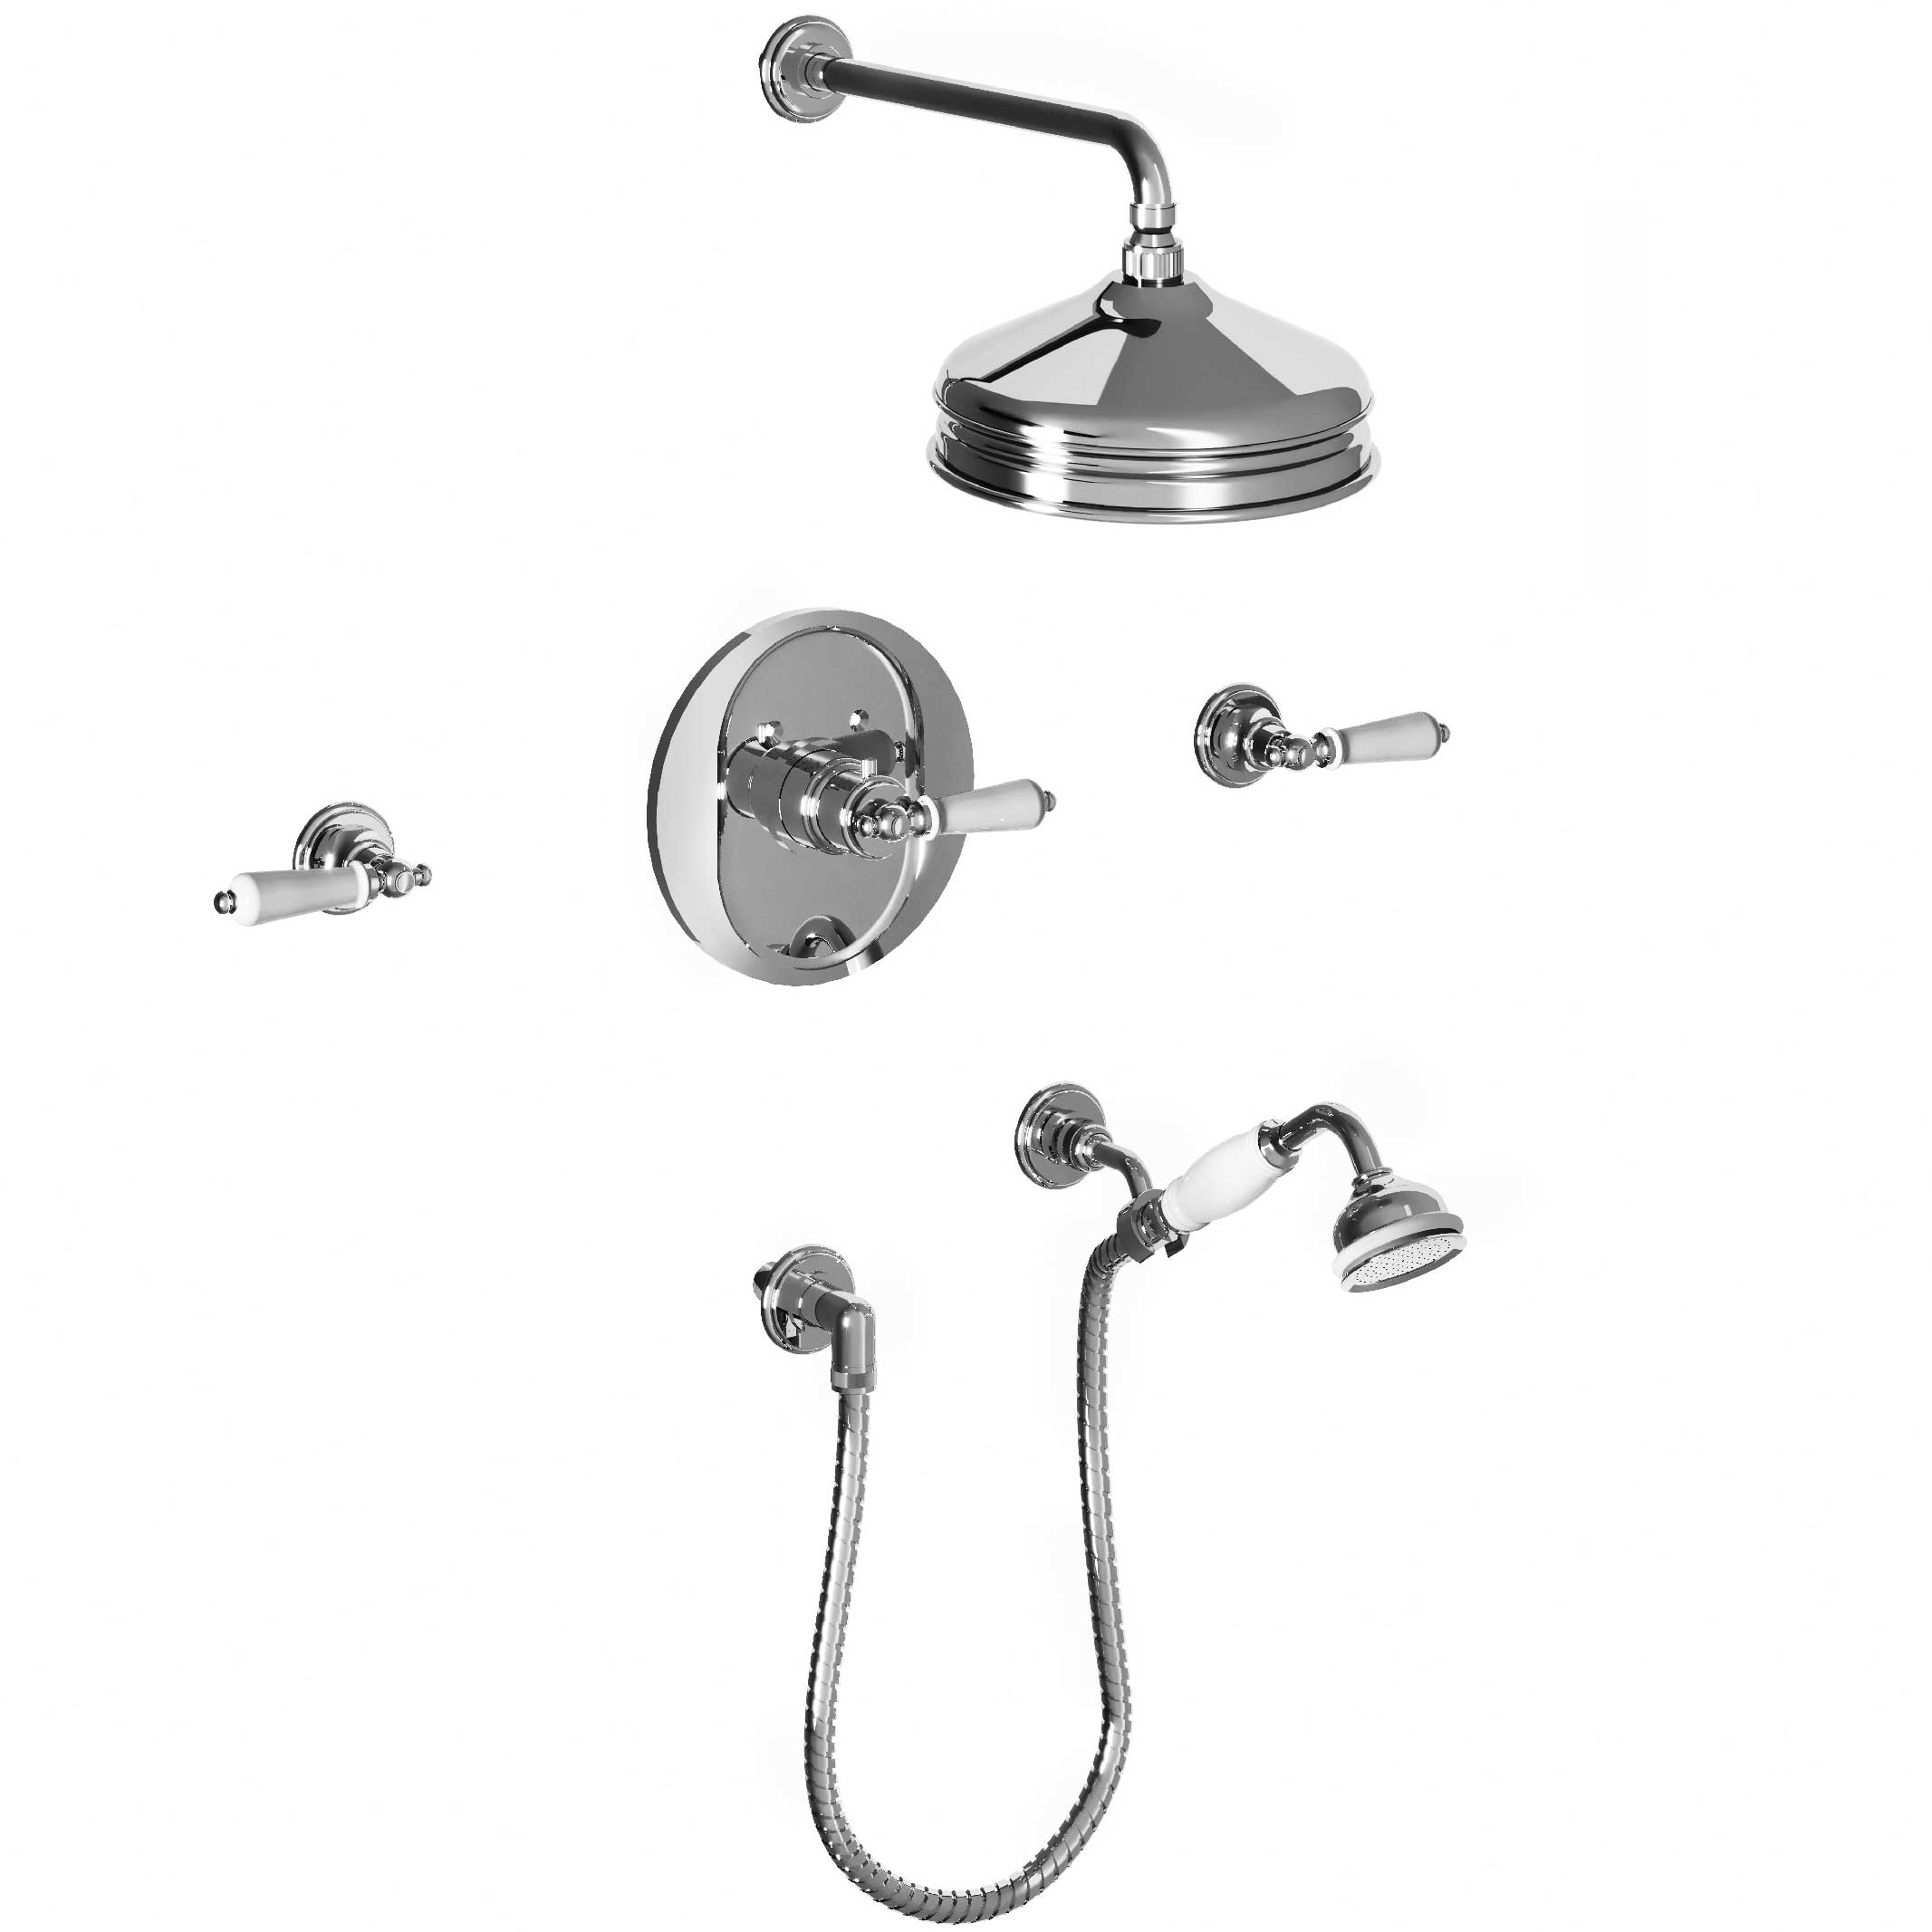 M04-2308T1 Thermostatic shower mixer package